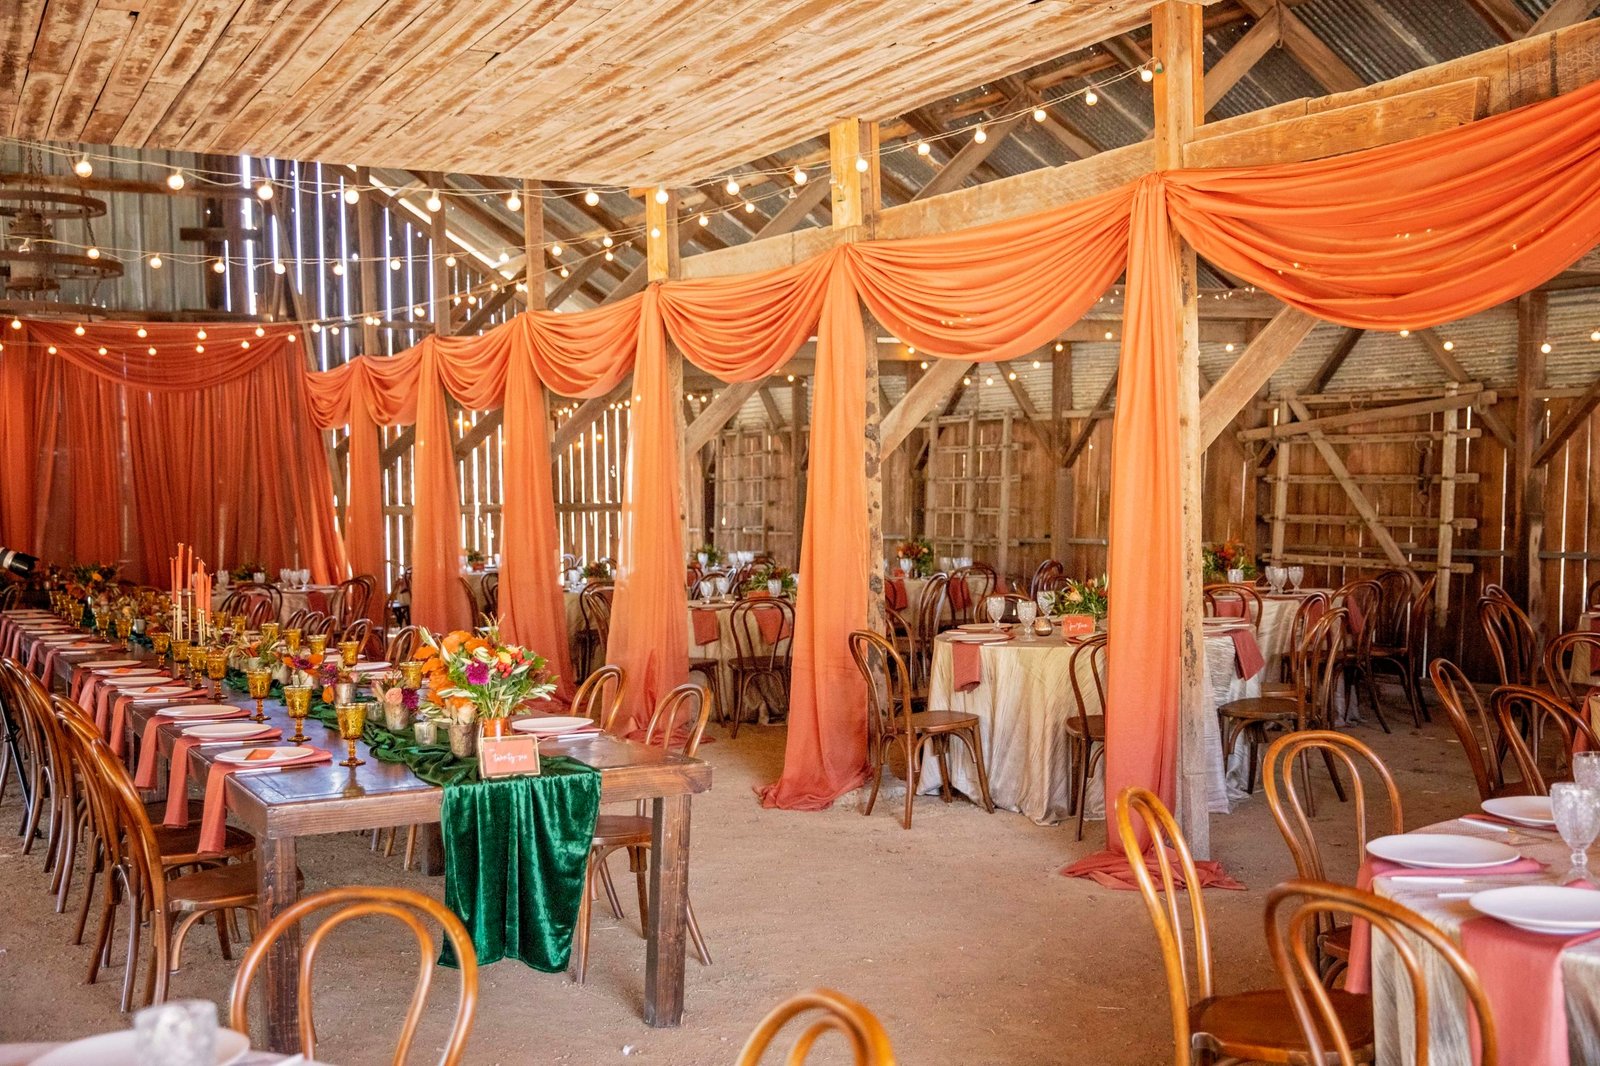 Interior of the barn decorated for a fall wedding at Loma Grande Ranch